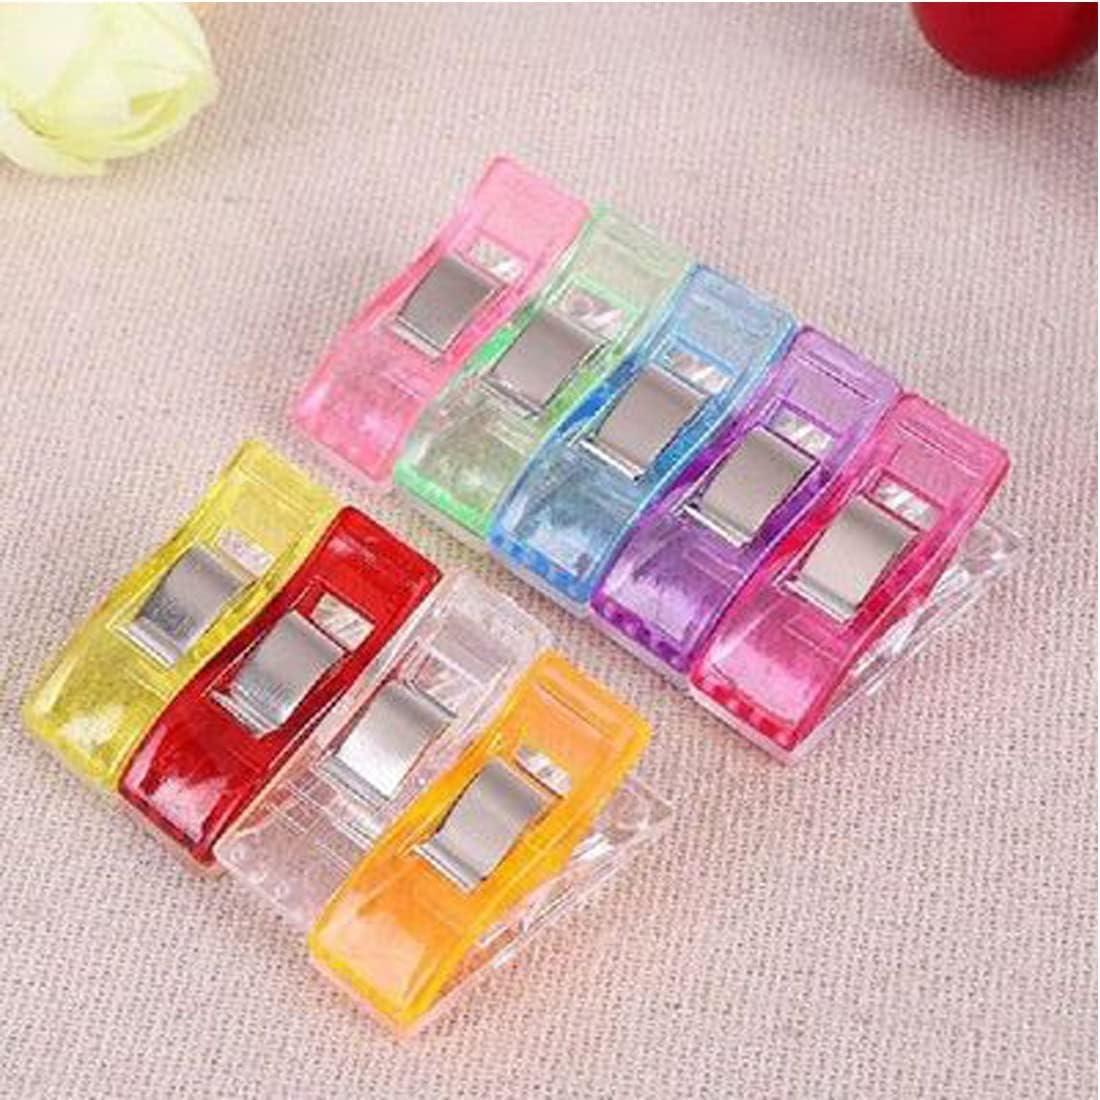  Otylzto Premium Plastic Clips, 100 Pcs with Box, Sewing  Notions for Sewing Quilting Supplies Crafting Tools, Assorted Colors for  Craft : Arts, Crafts & Sewing